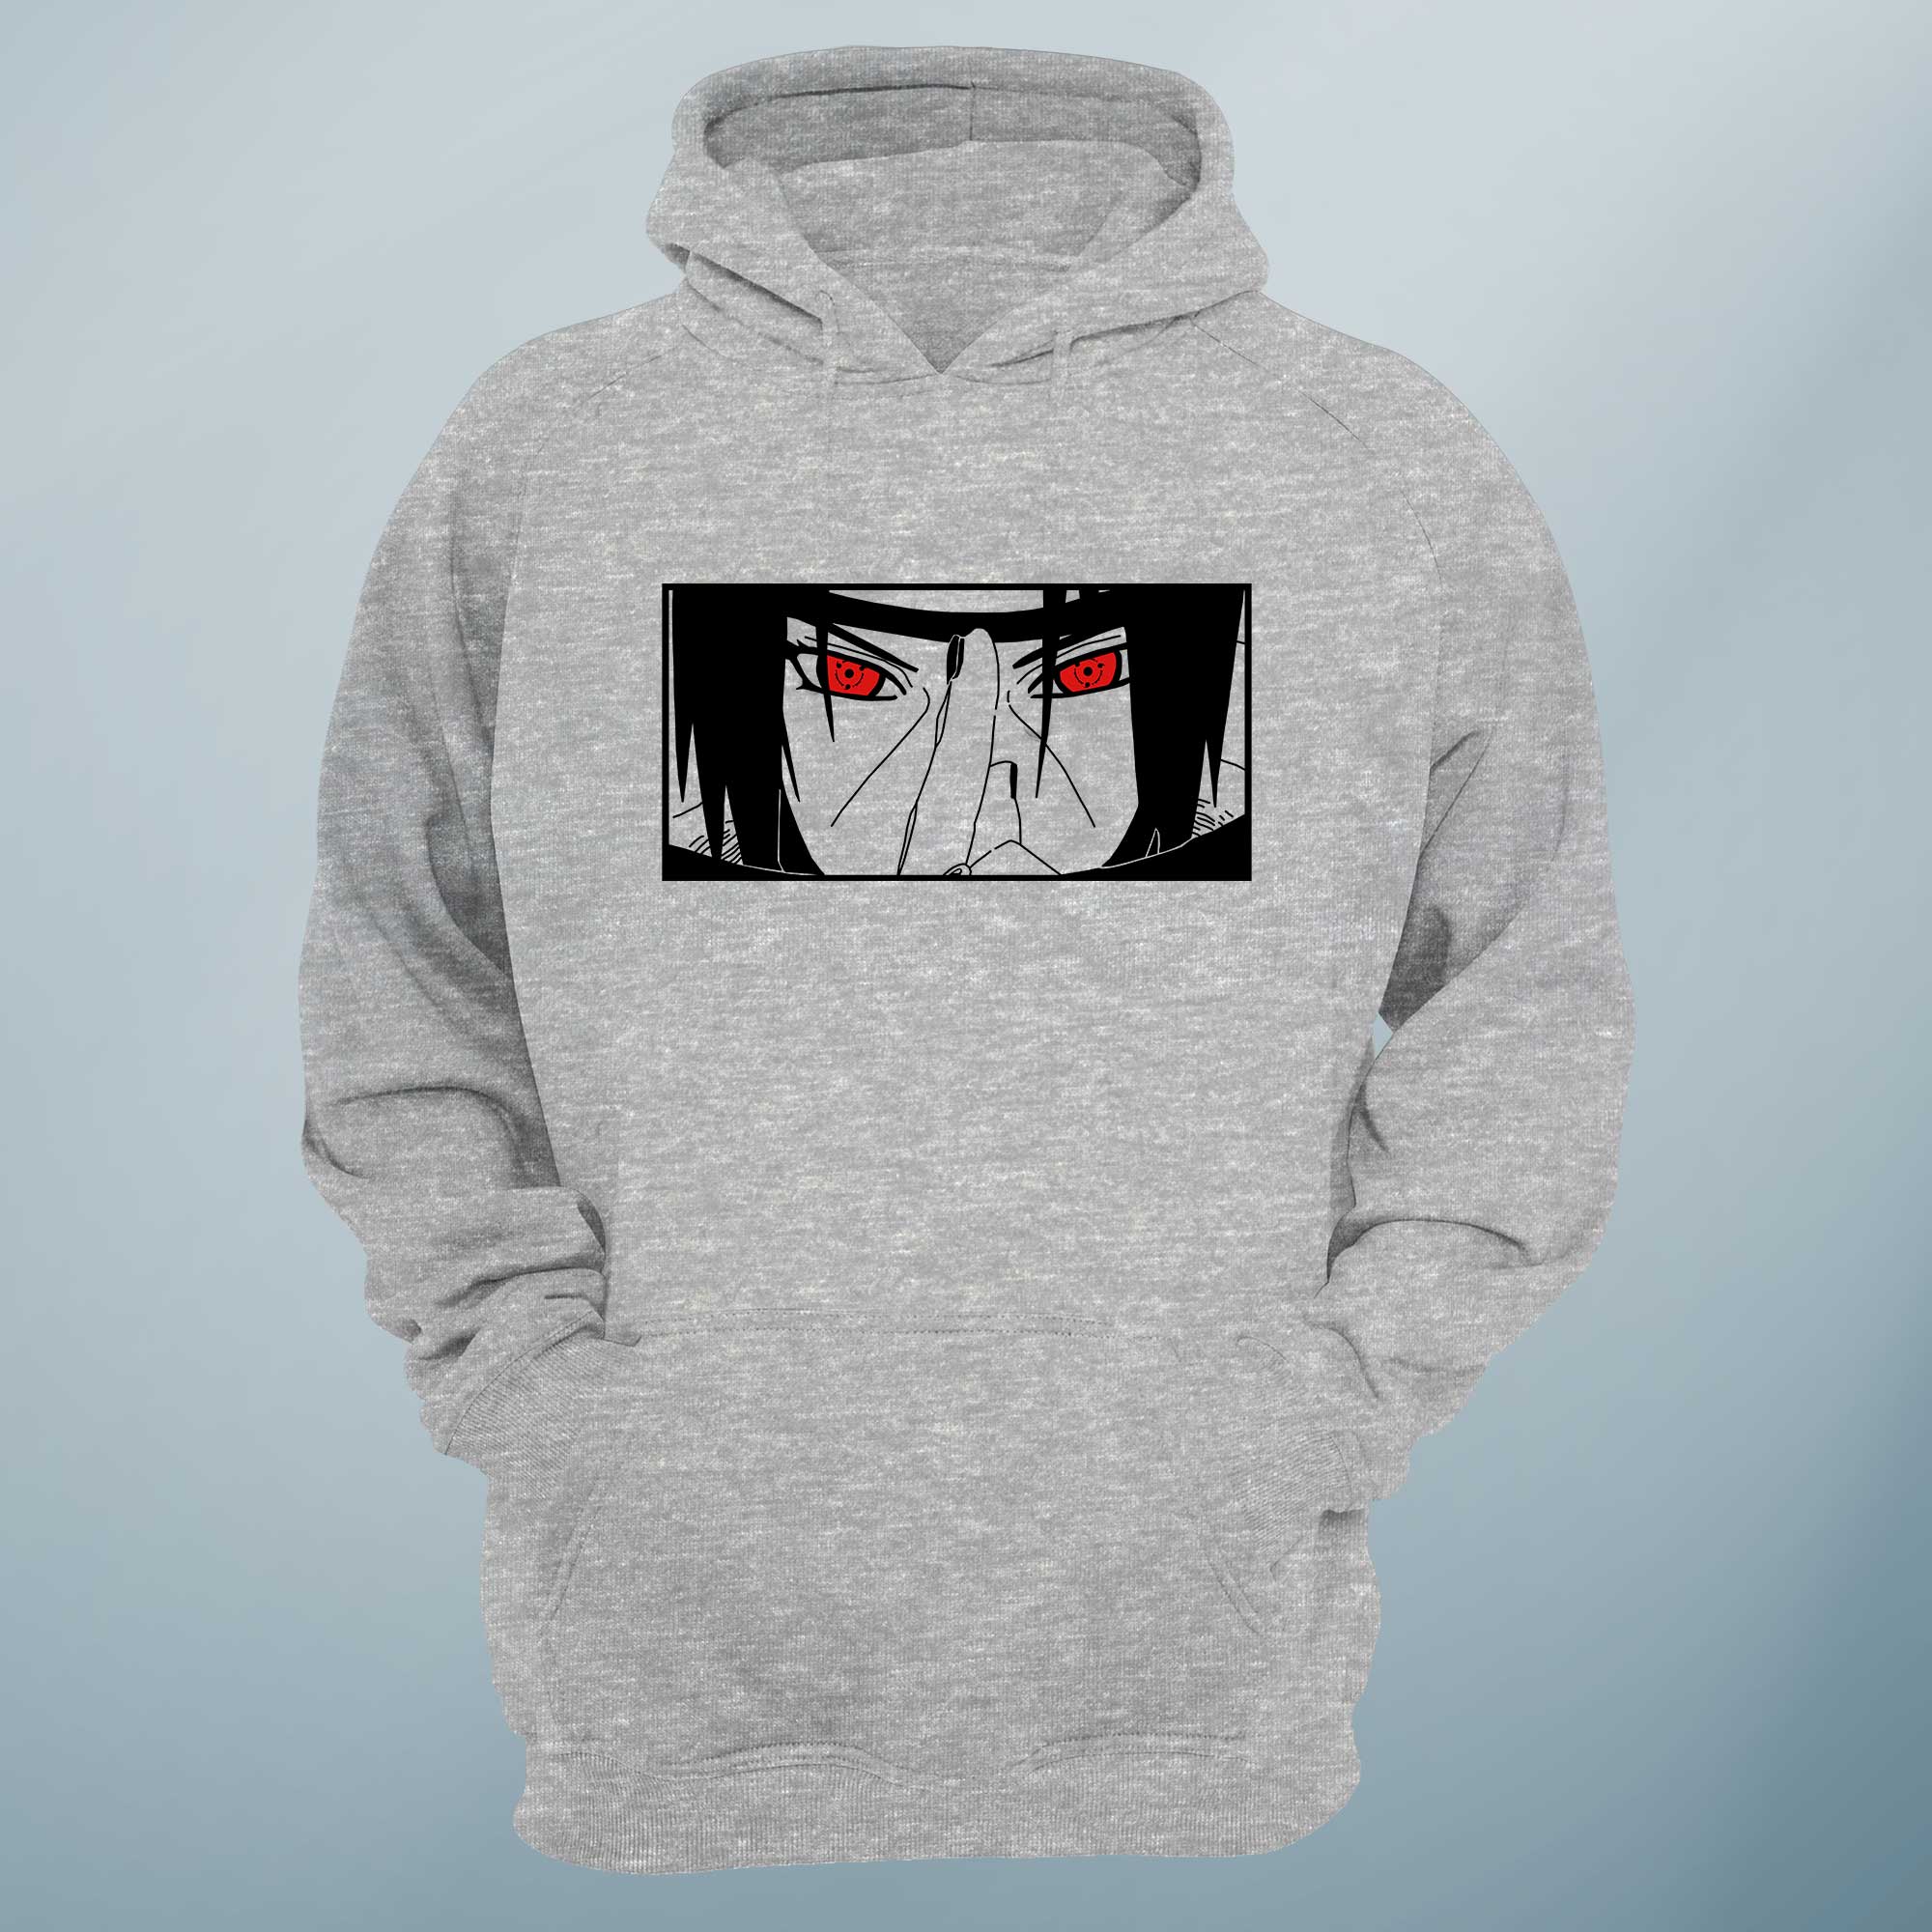 Download Anime Girl Hoodie With Red Eyes Wallpaper | Wallpapers.com